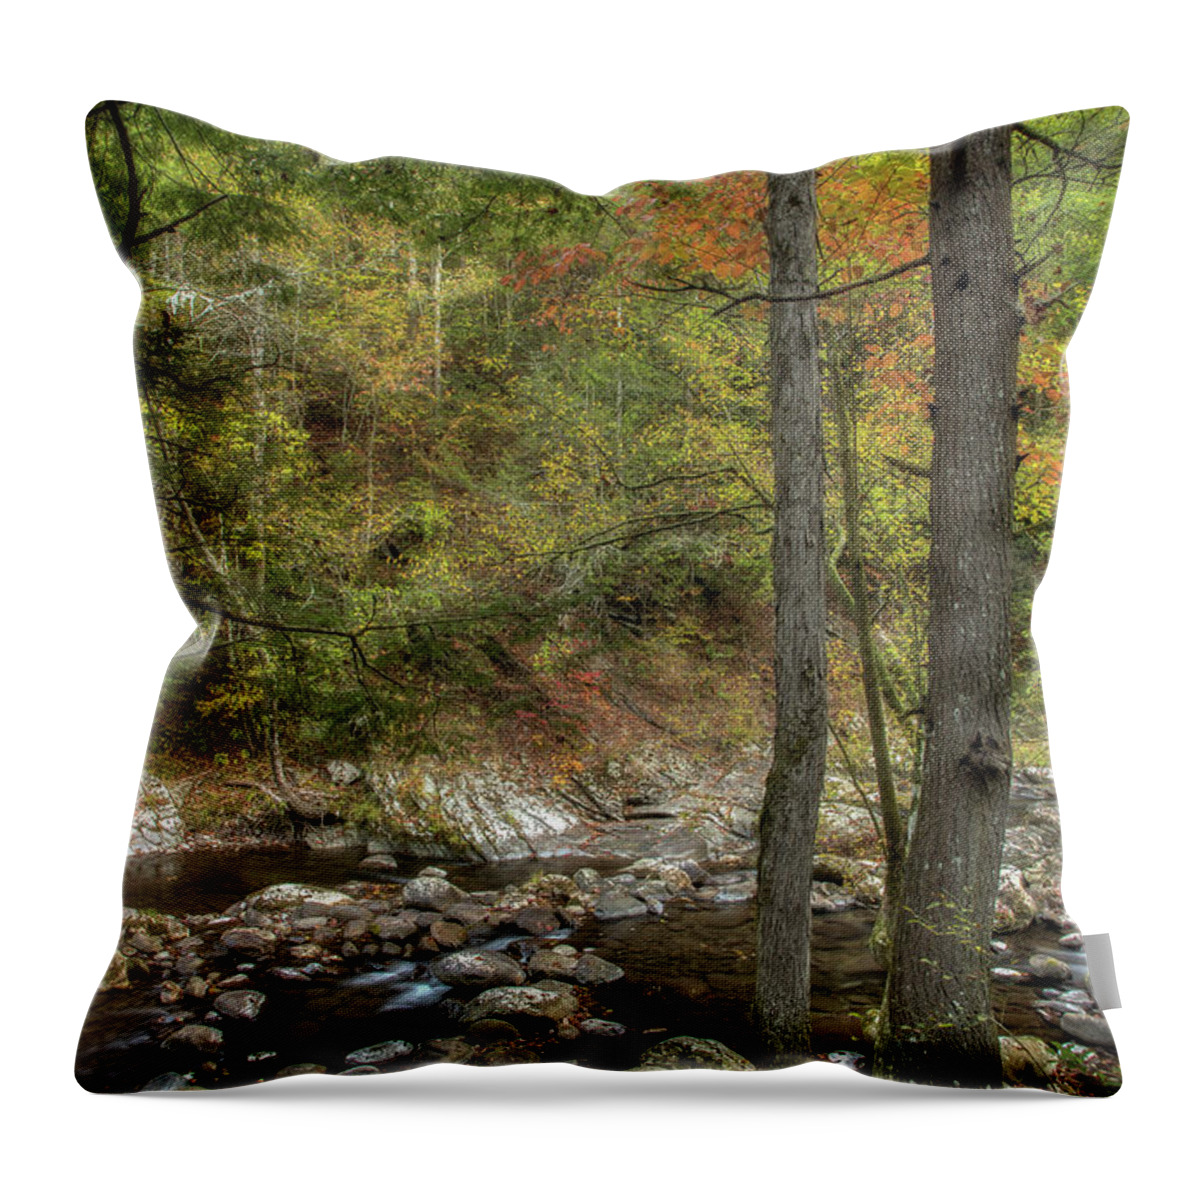 Stream Throw Pillow featuring the photograph Walking Along The Edge by Mike Eingle